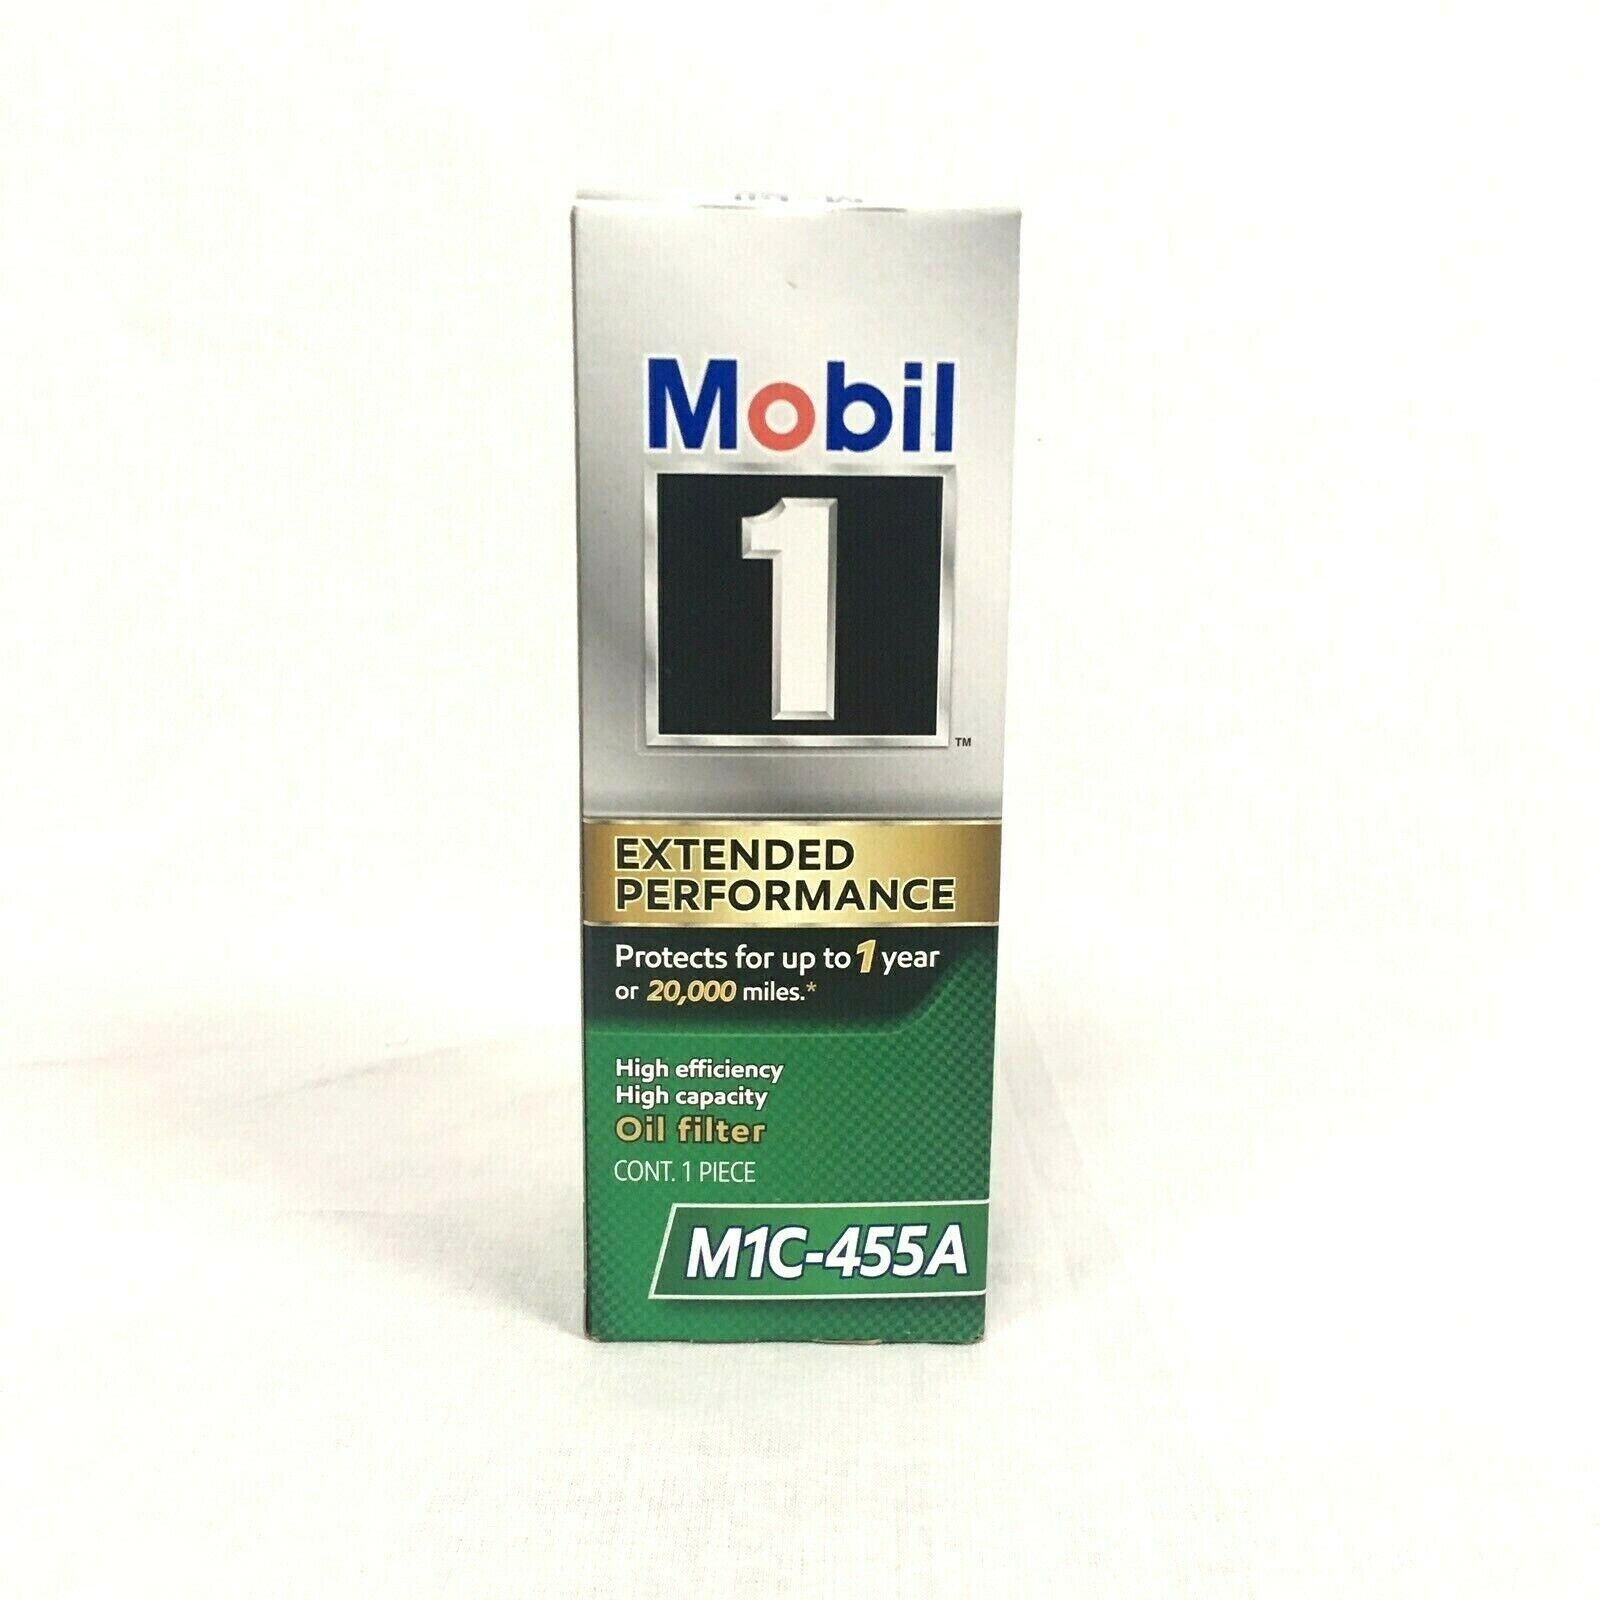 Mobil 1 M1C-455A Extended Performance Oil Filter New - $12.86